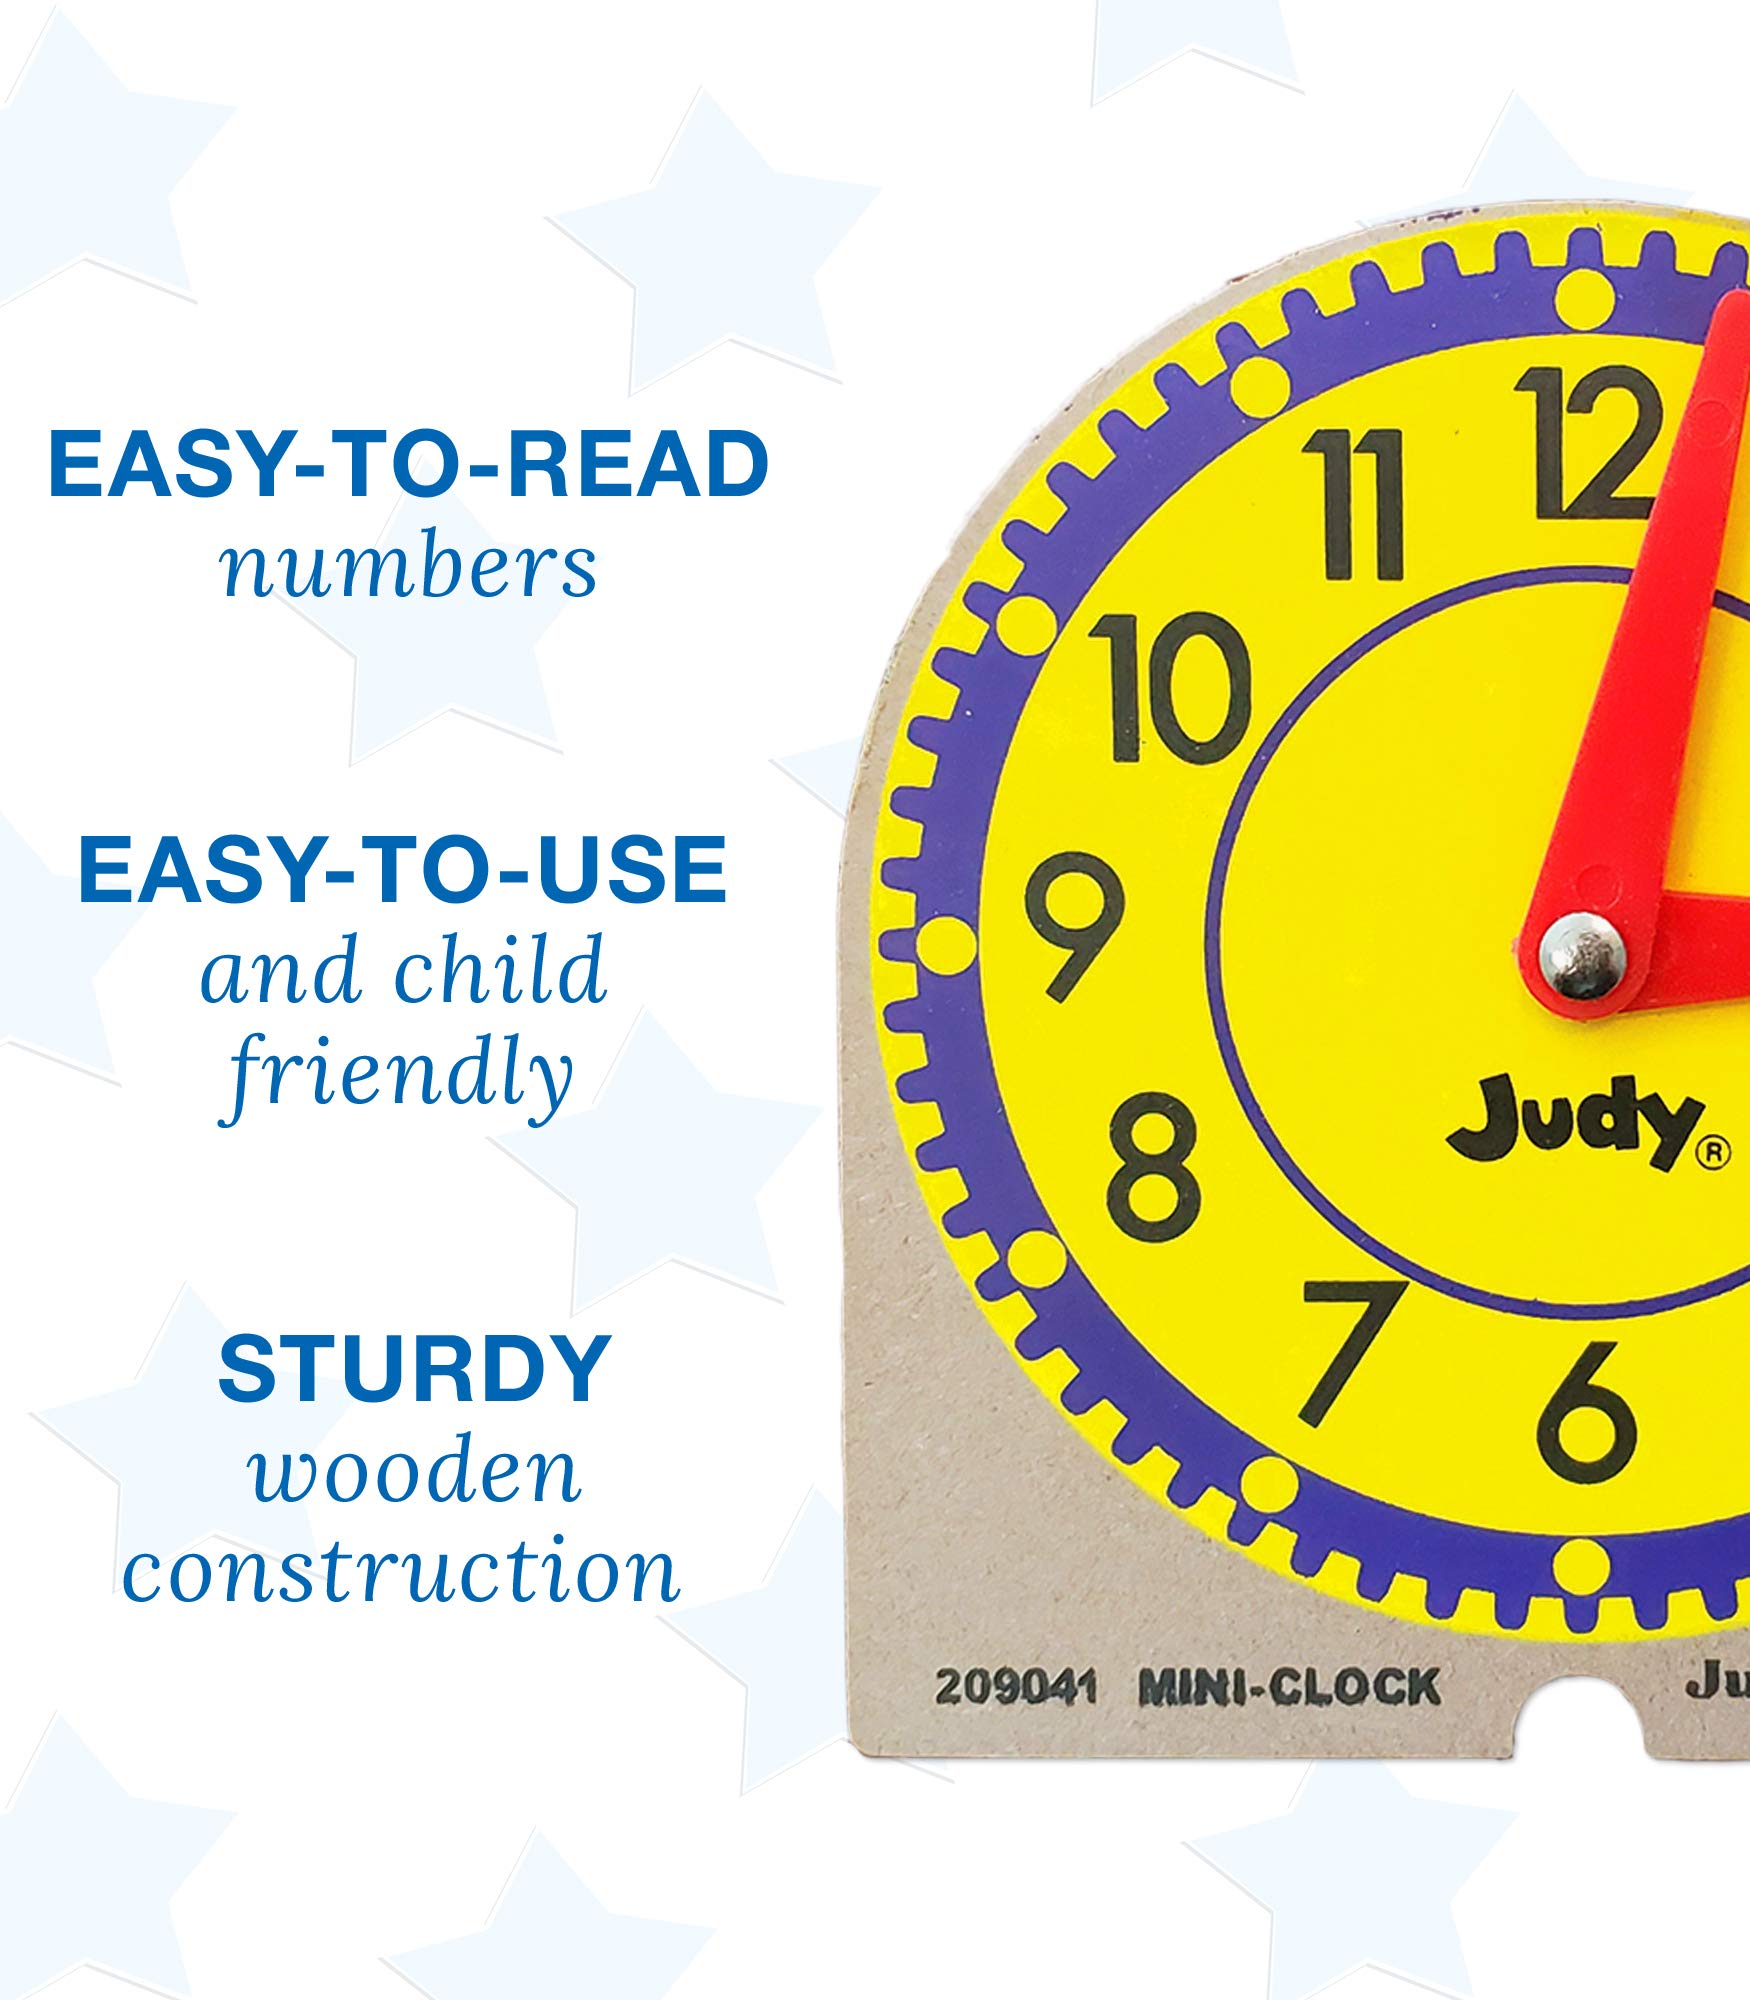 Carson Dellosa Mini Judy Clock Set— Grades K-3 Math Manipulatives for Telling Time, Colorful Wooden Mini Clocks With Movable Hour and Minute Hands, 4